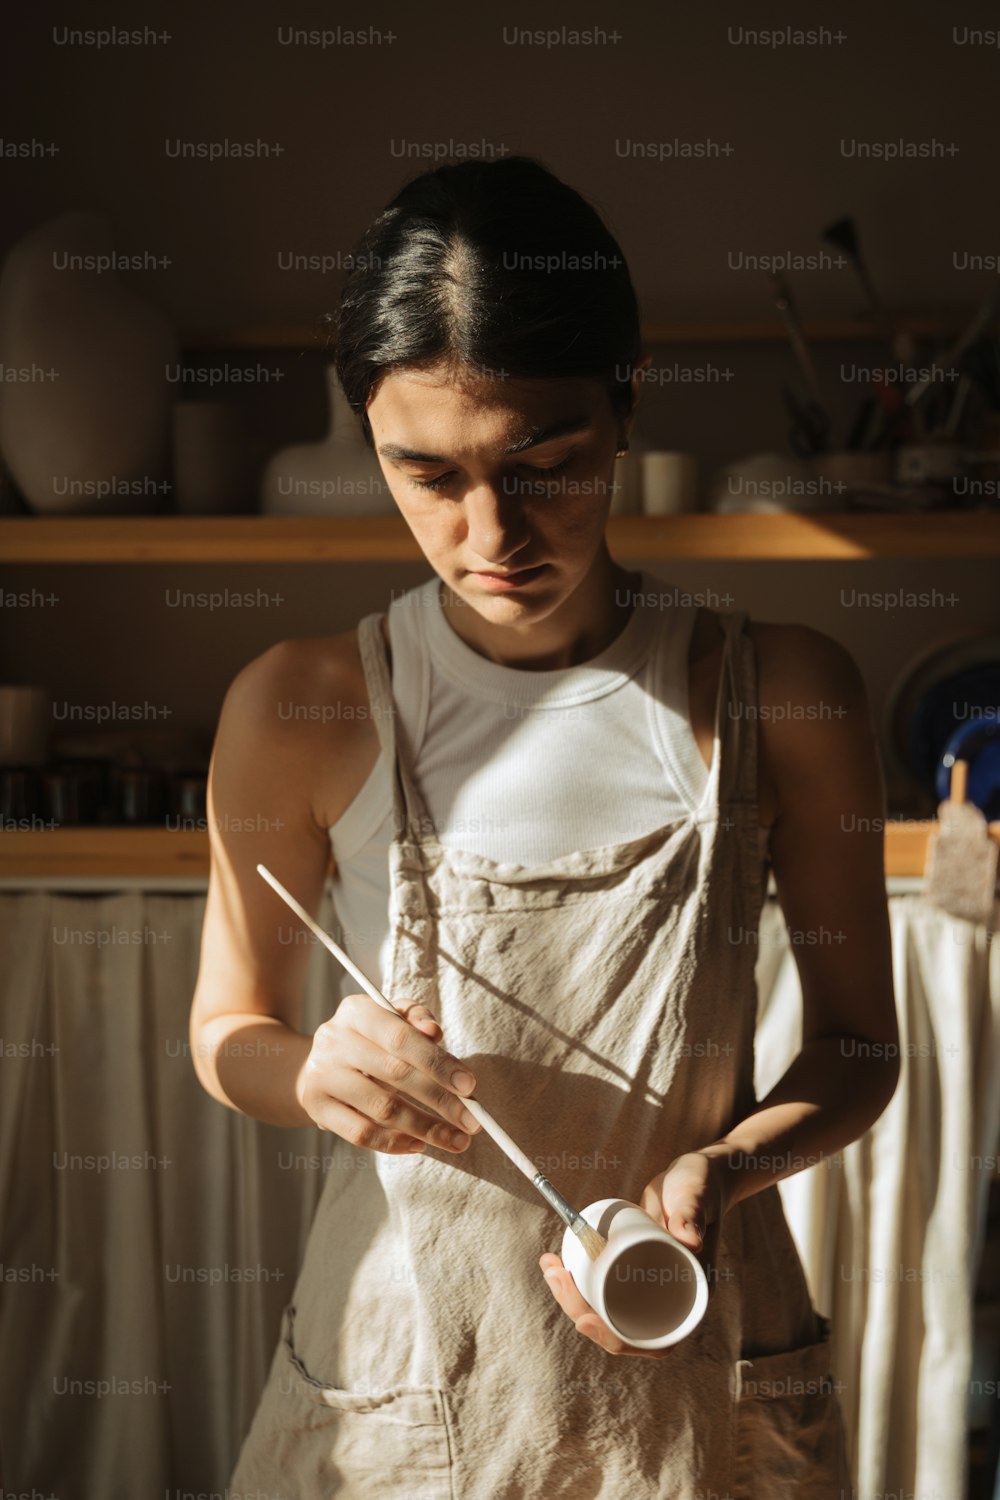 a man in an apron holding a pair of scissors